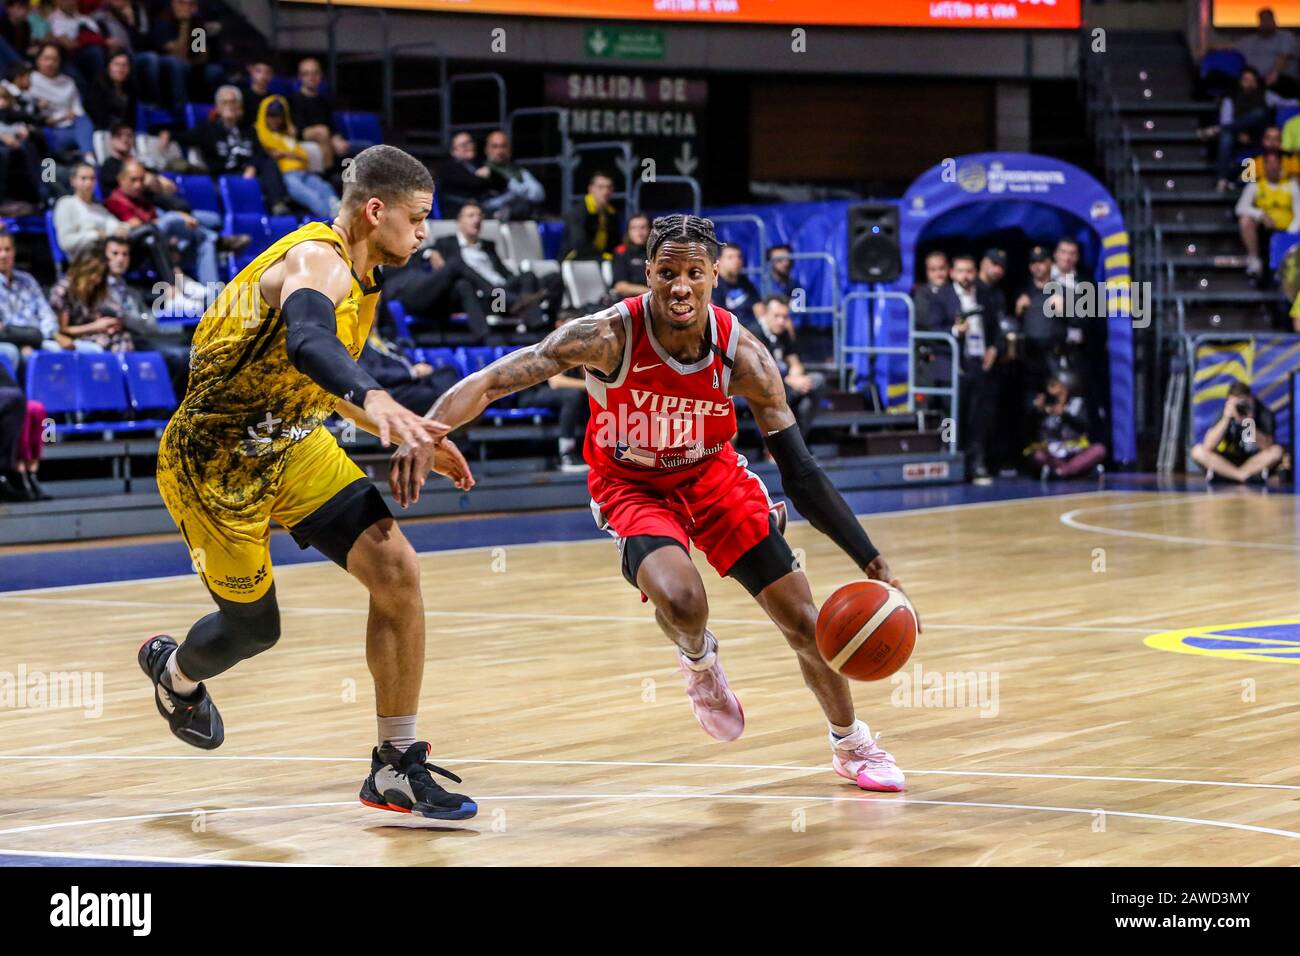 matur marial maker (rio grande valley vipers) in action ,  marcato from gabriel lundberg (iberostar tenerife) during Iberostar Tenerife vs Rio Grande Stock Photo